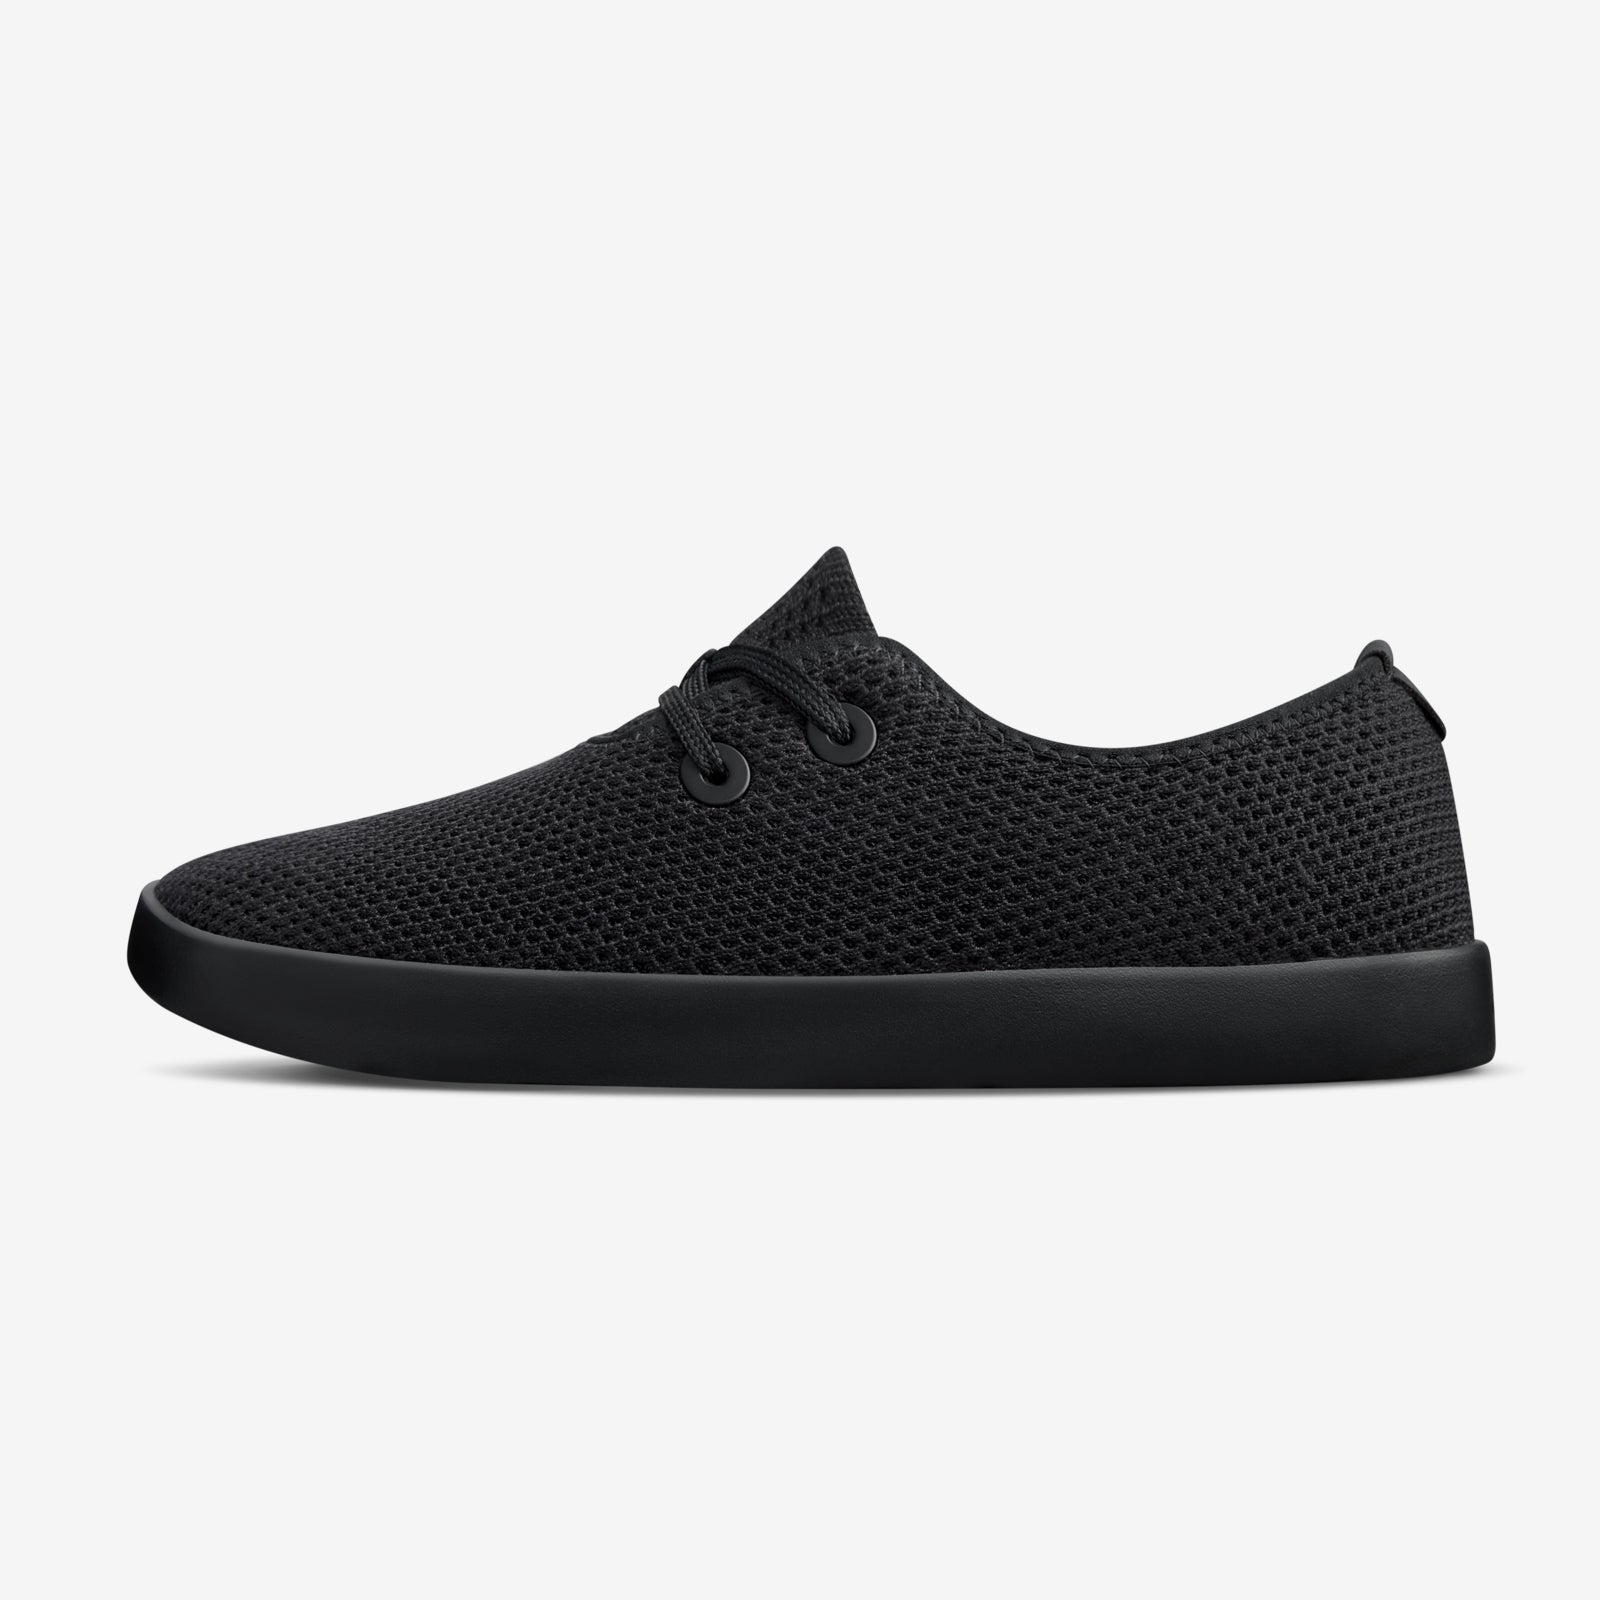 Women's Tree Skippers - Natural Black (Natural Black Sole)